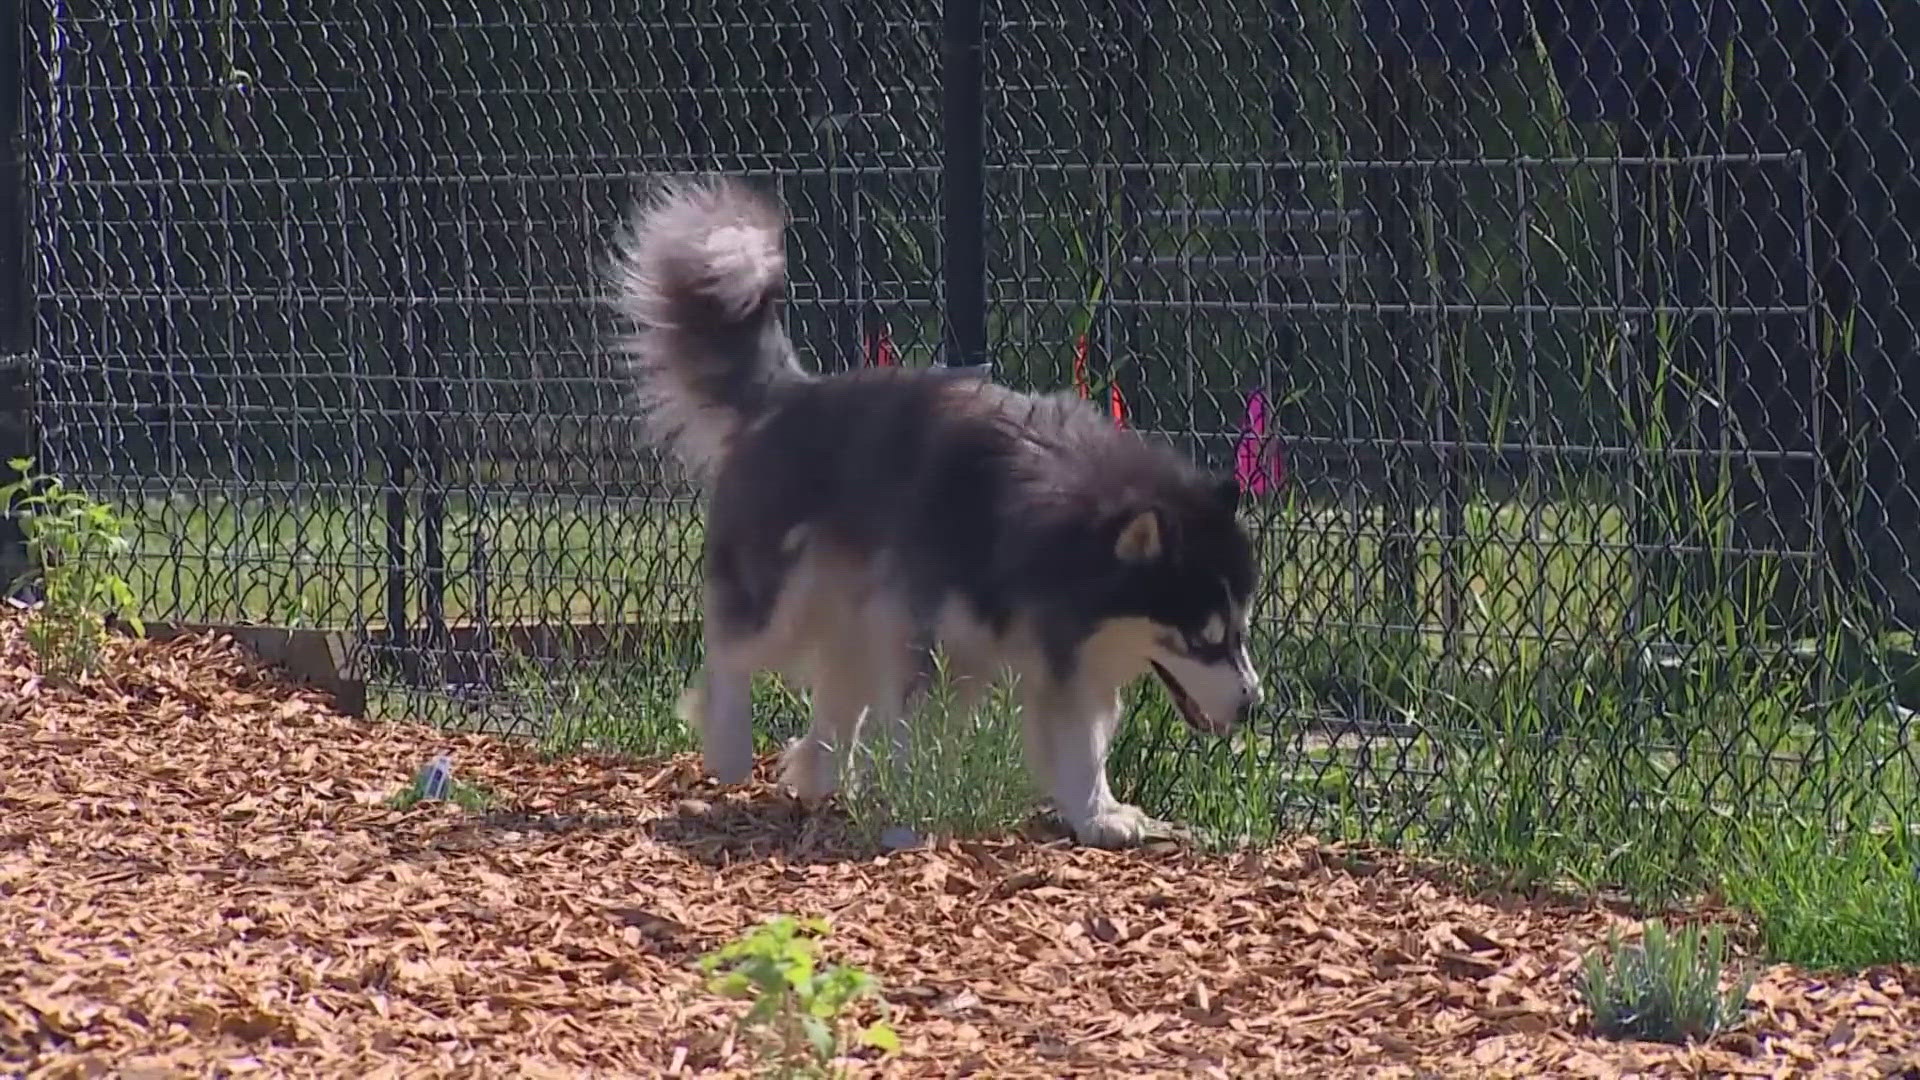 The Everett Animal Shelter is building a "sensory garden" to help dogs during their stays.